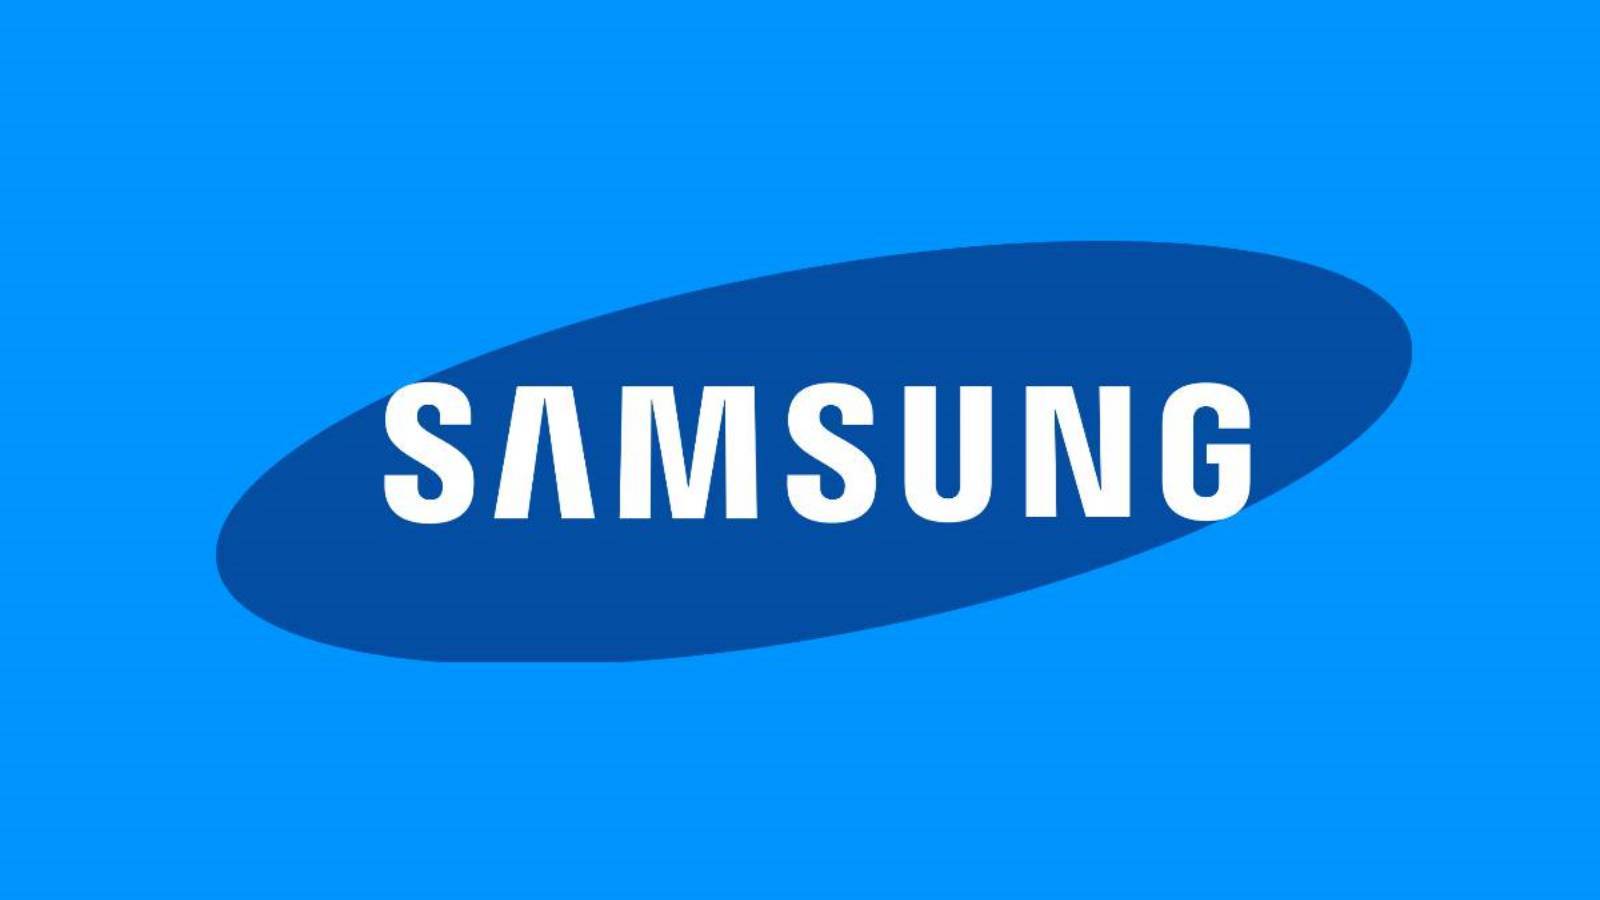 Samsung Announces IMPORTANT Android Update GALAXY Phones